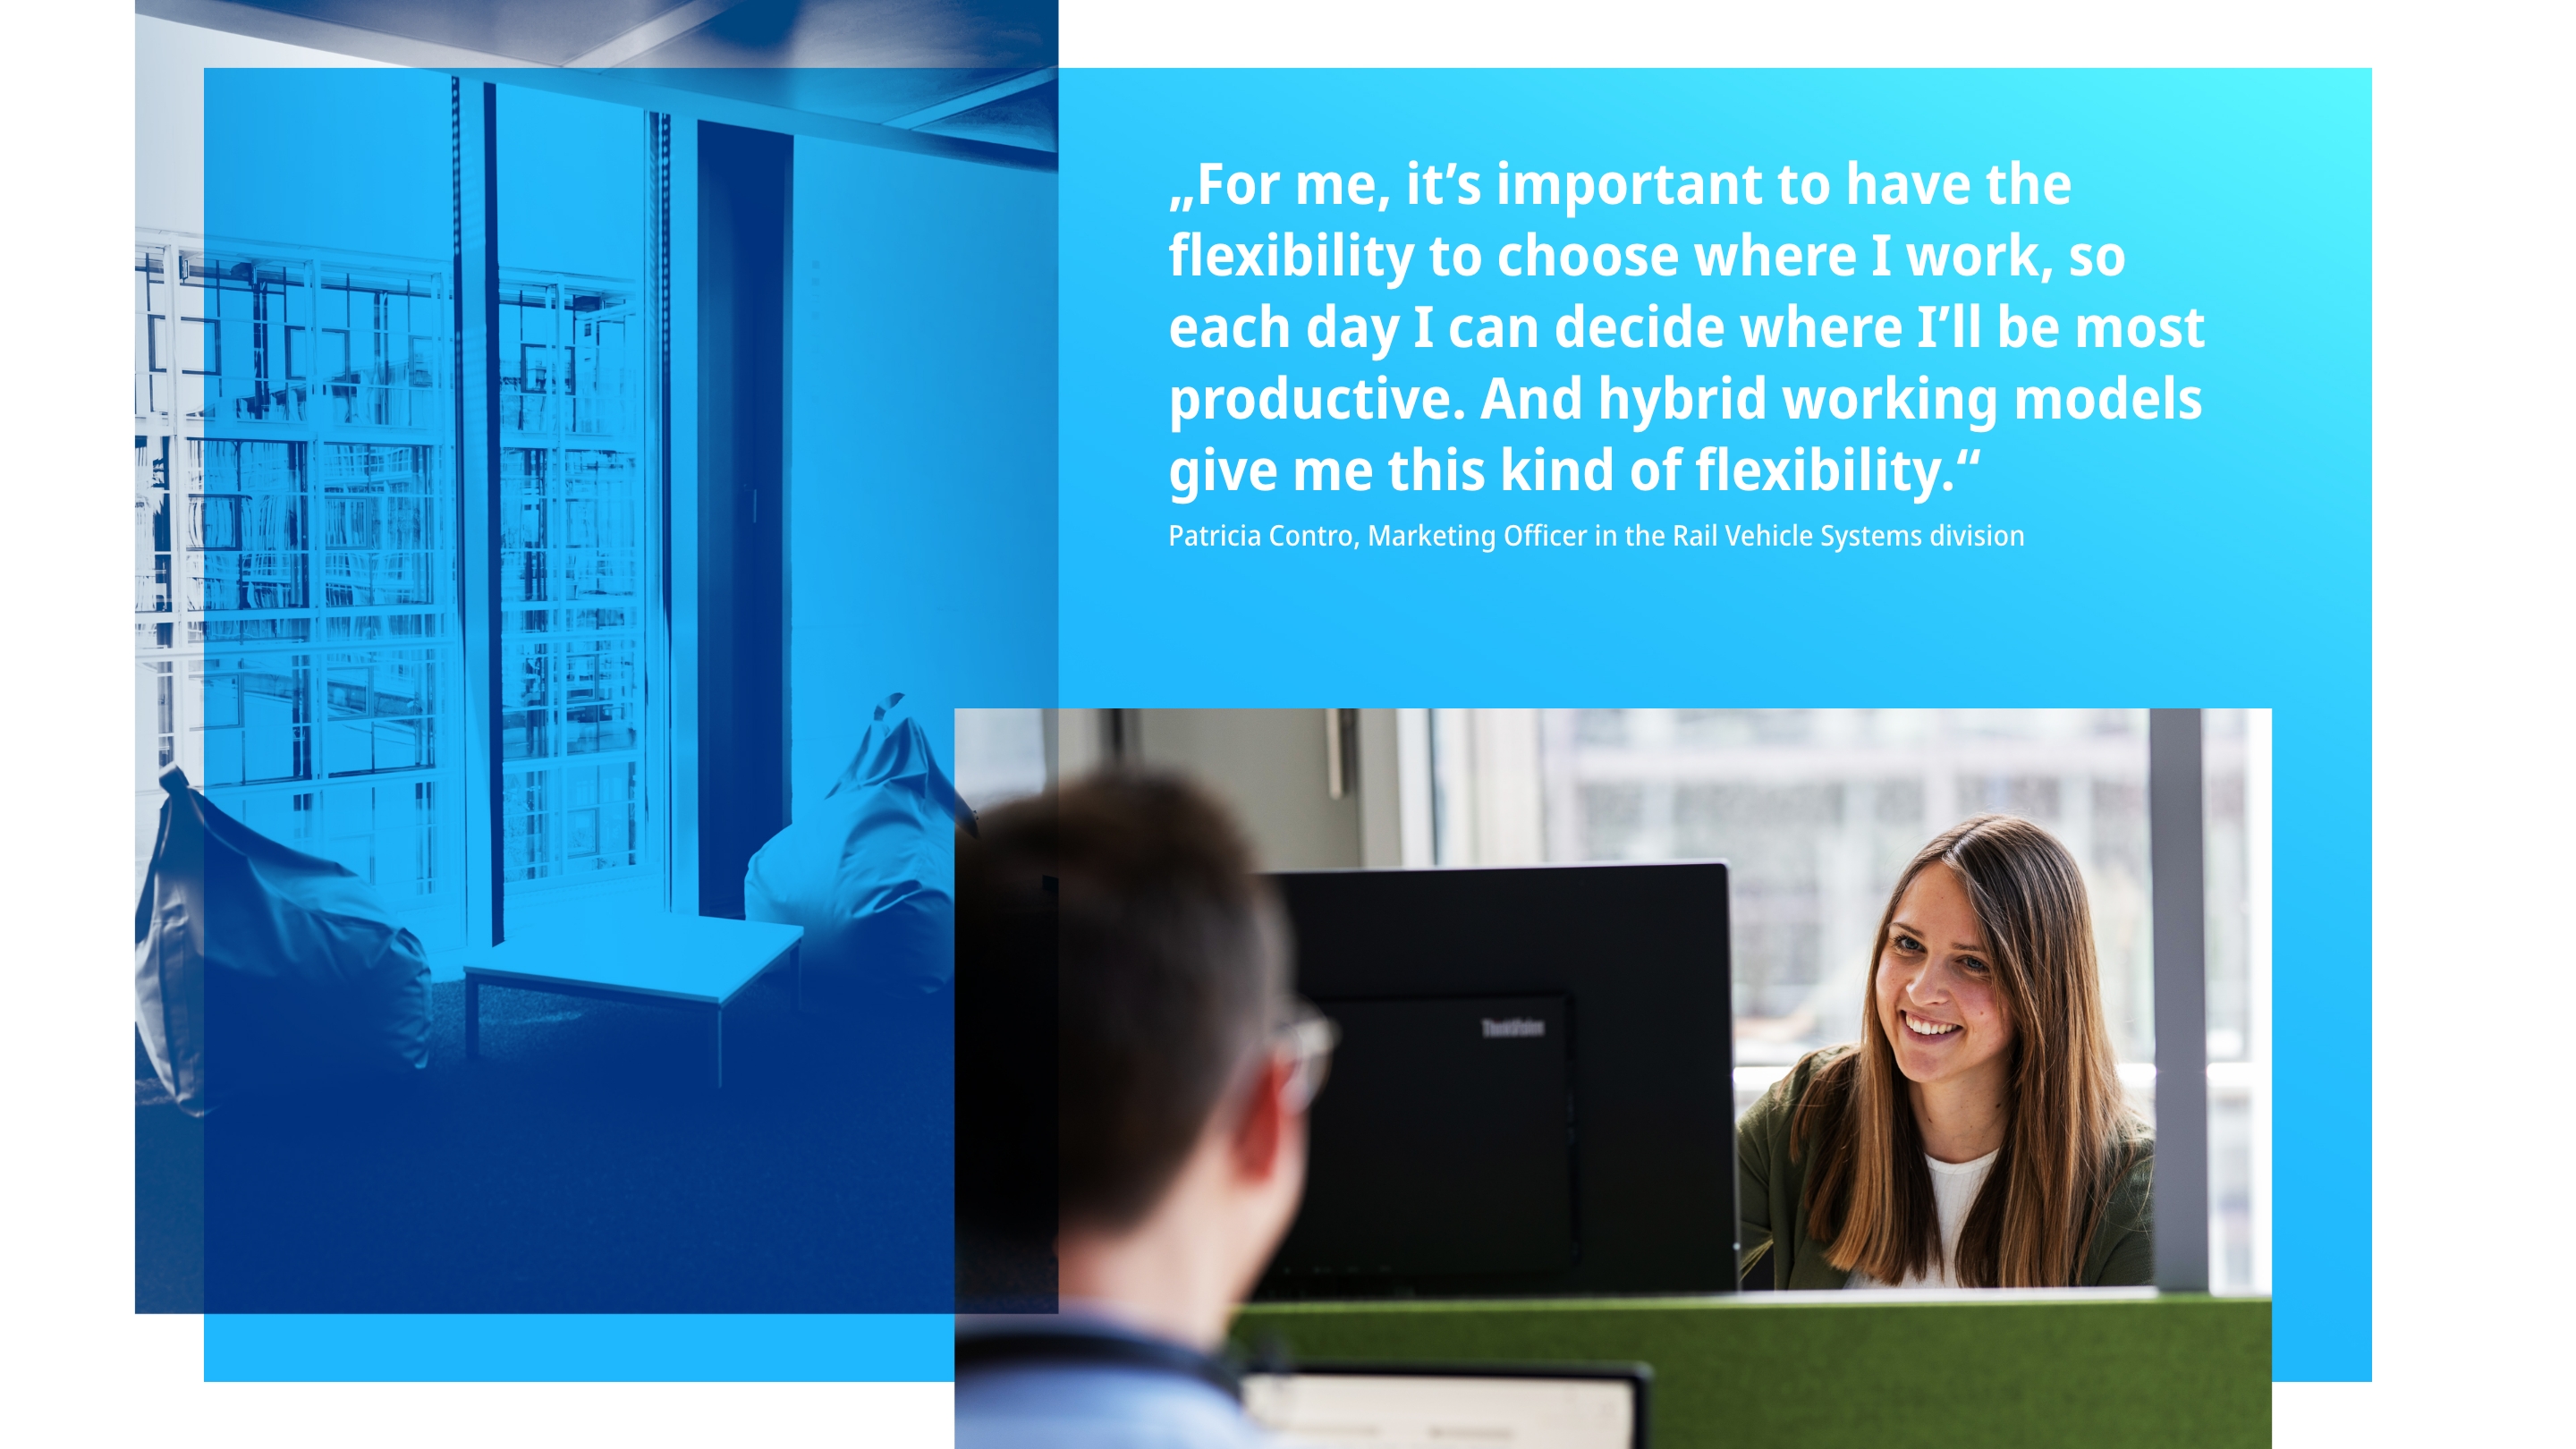 Photo collage of a modern office, employee Patricia Contro at her desk sharing desk and a quote from her.